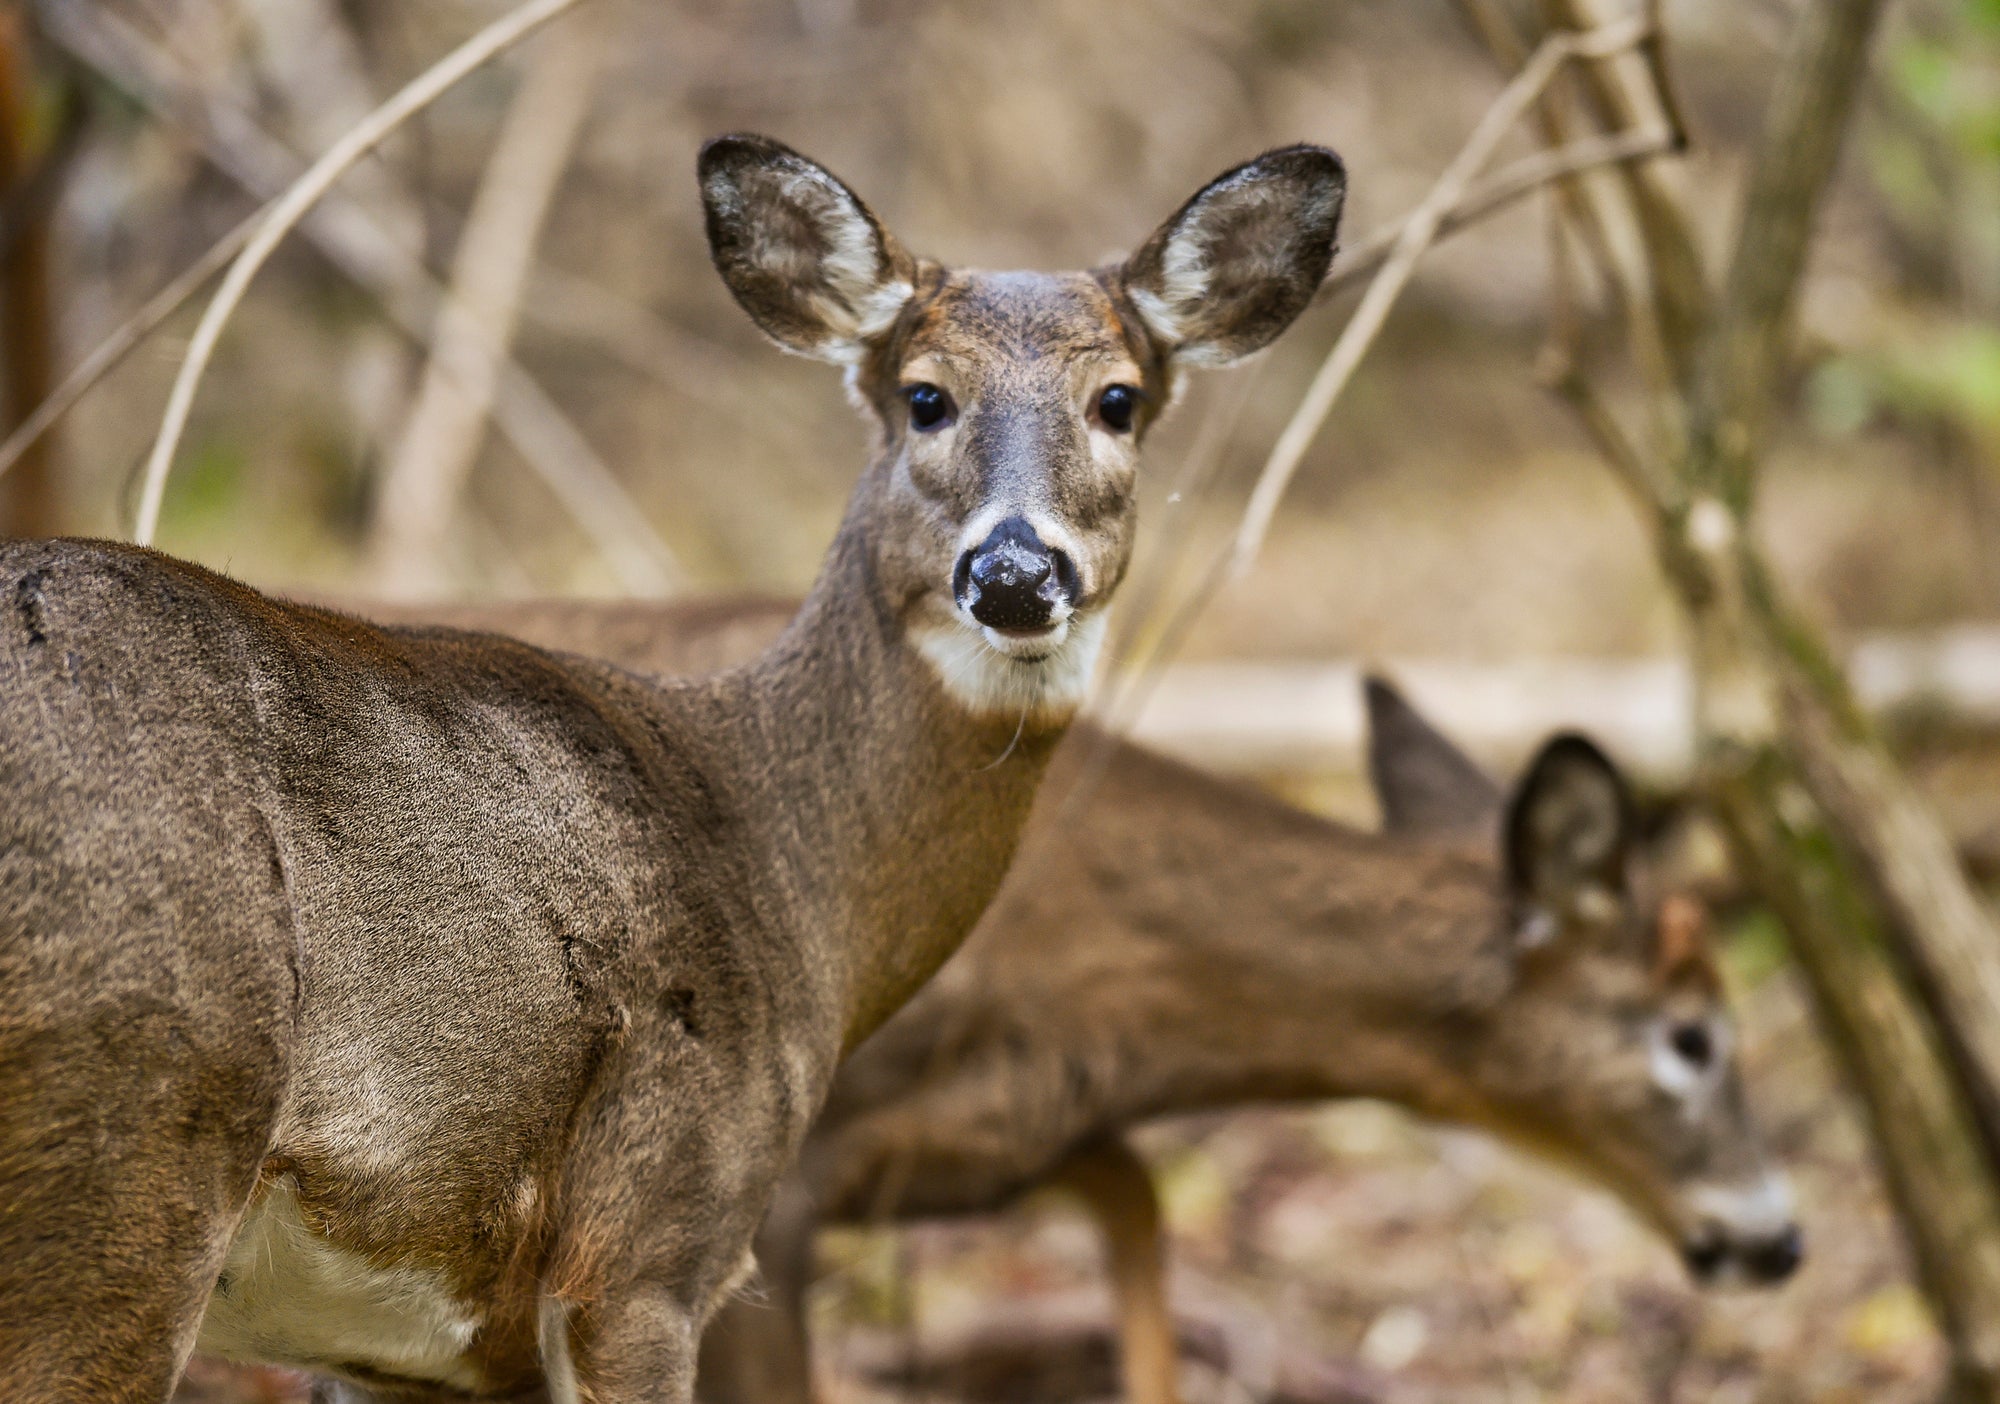 Commercial Deer Repellent: What to Look For